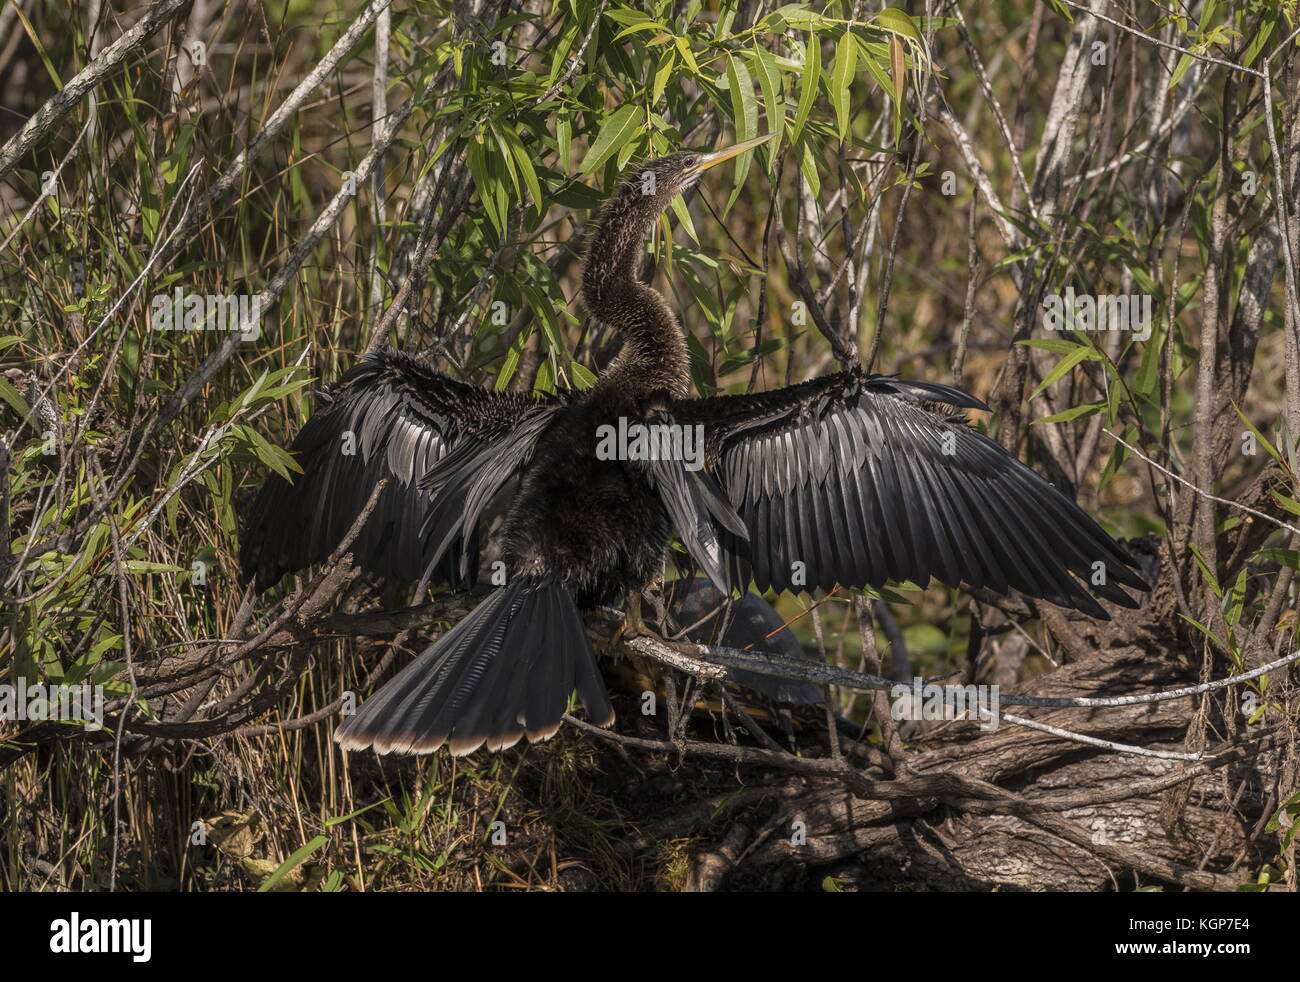 Anhinga, Anhinga anhinga, drying wings after diving, in Florida. They have poor waterproofing and buoyancy. Stock Photo